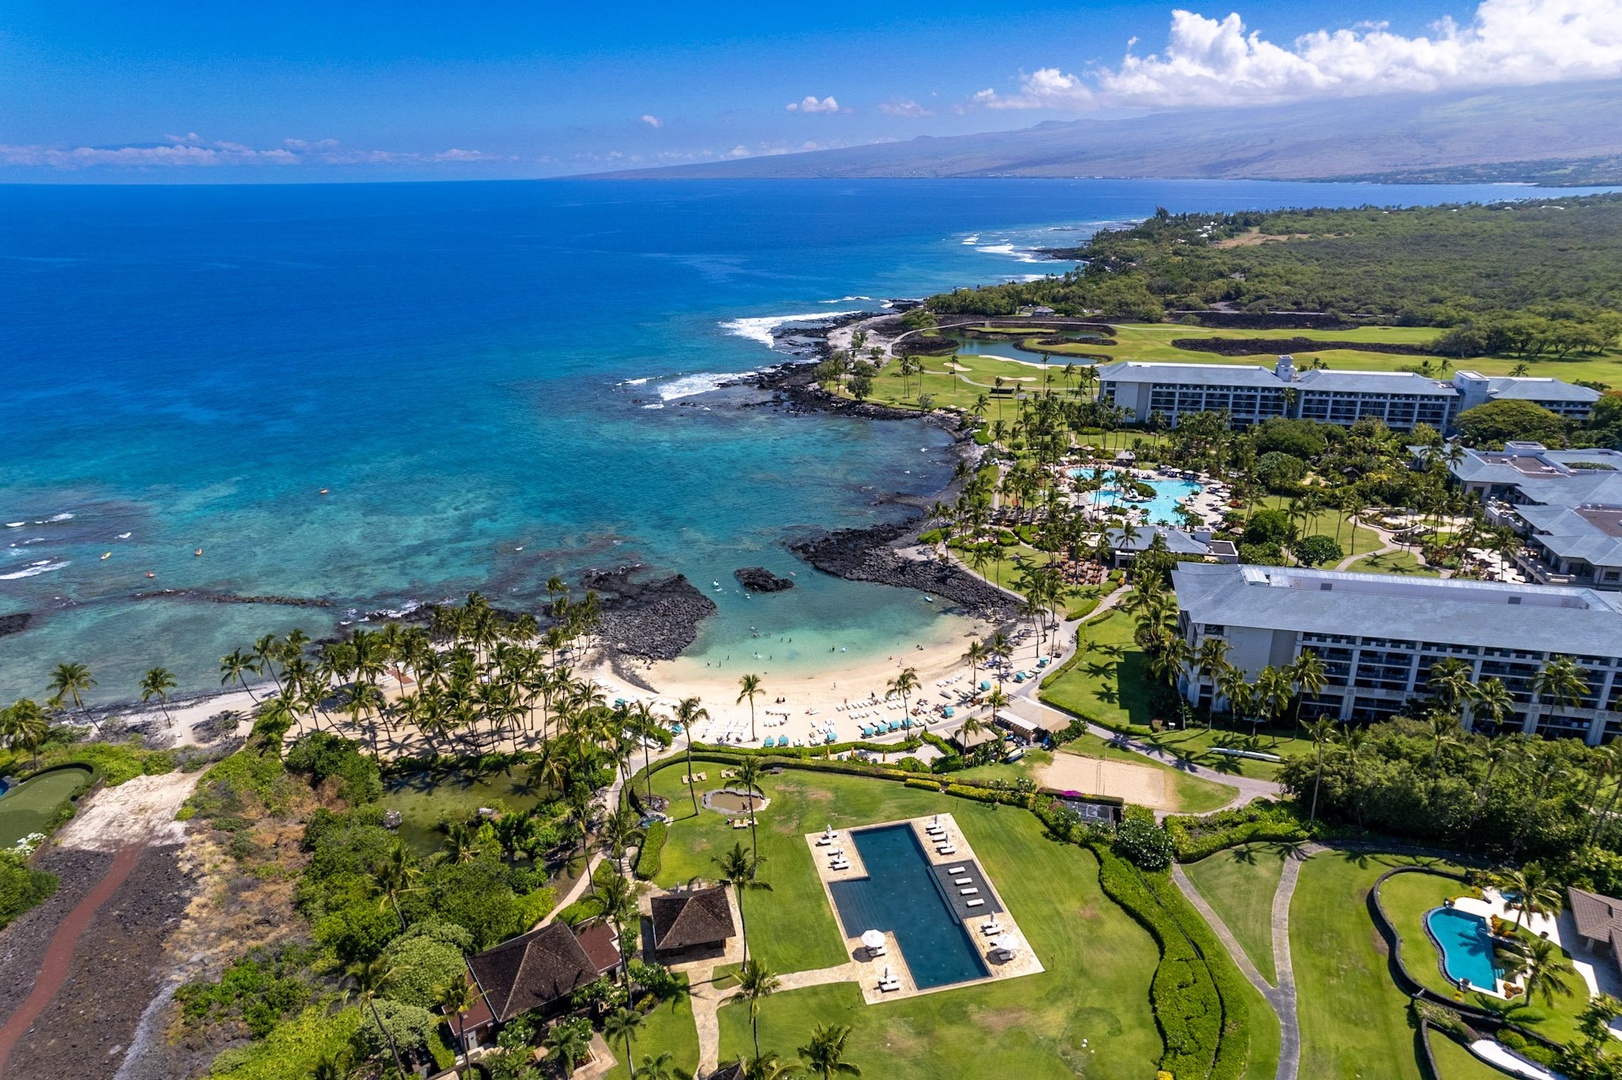 Kamuela Vacation Rentals, 3BD Na Hale 3 at Pauoa Beach Club at Mauna Lani Resort - Aerial shot of the private Pauoa Beach Club and Fairmont Orchid Hotel